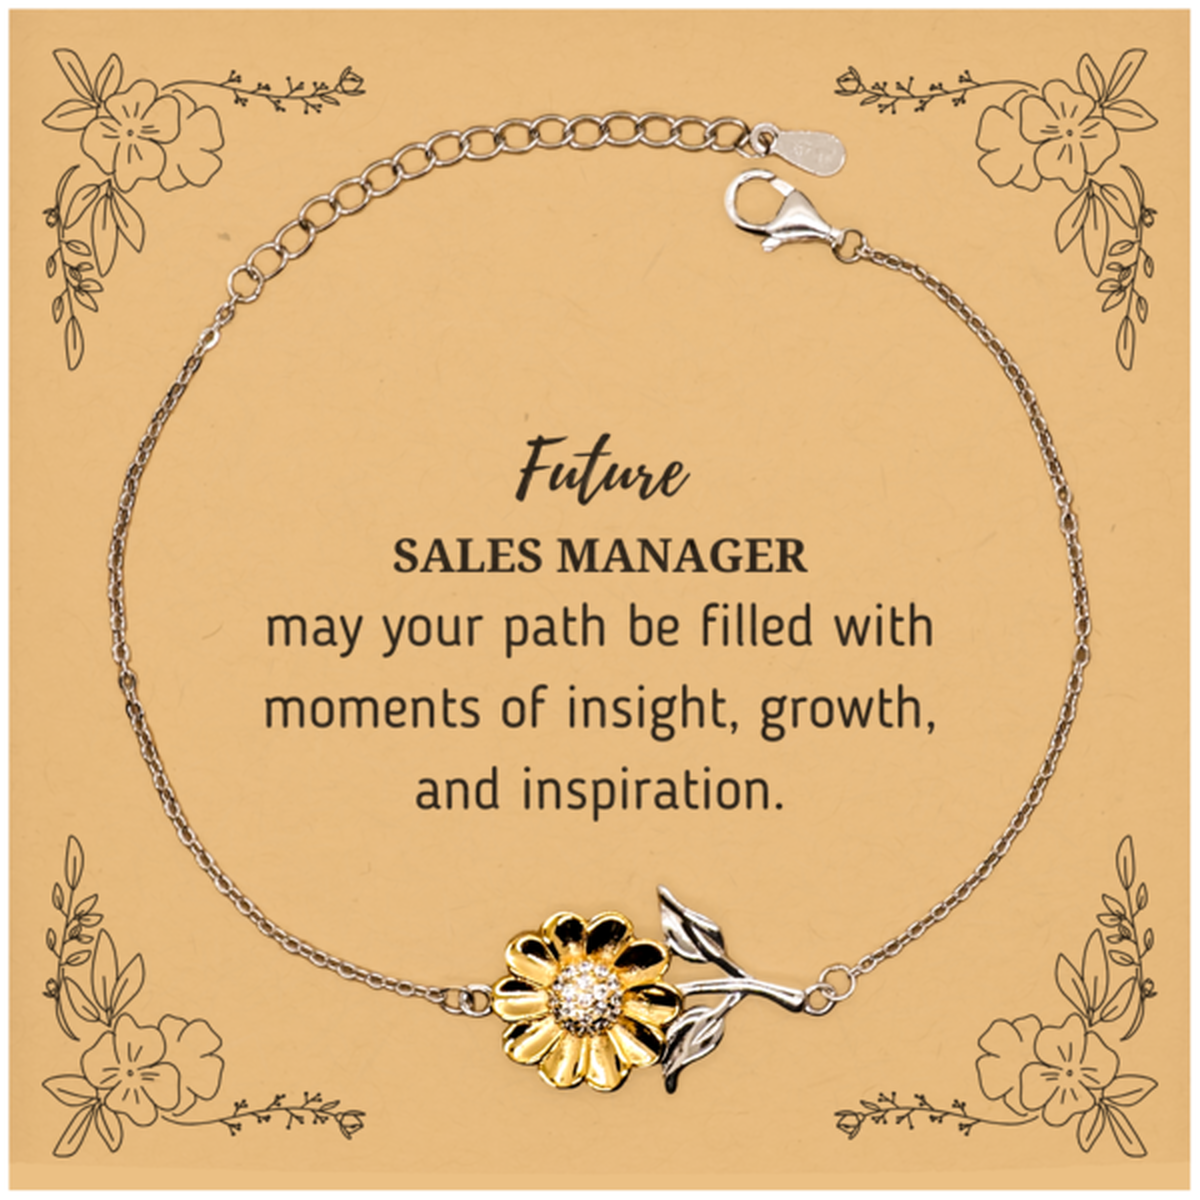 Future Sales Manager Gifts, May your path be filled with moments of insight, Graduation Gifts for New Sales Manager, Christmas Unique Sunflower Bracelet For Men, Women, Friends